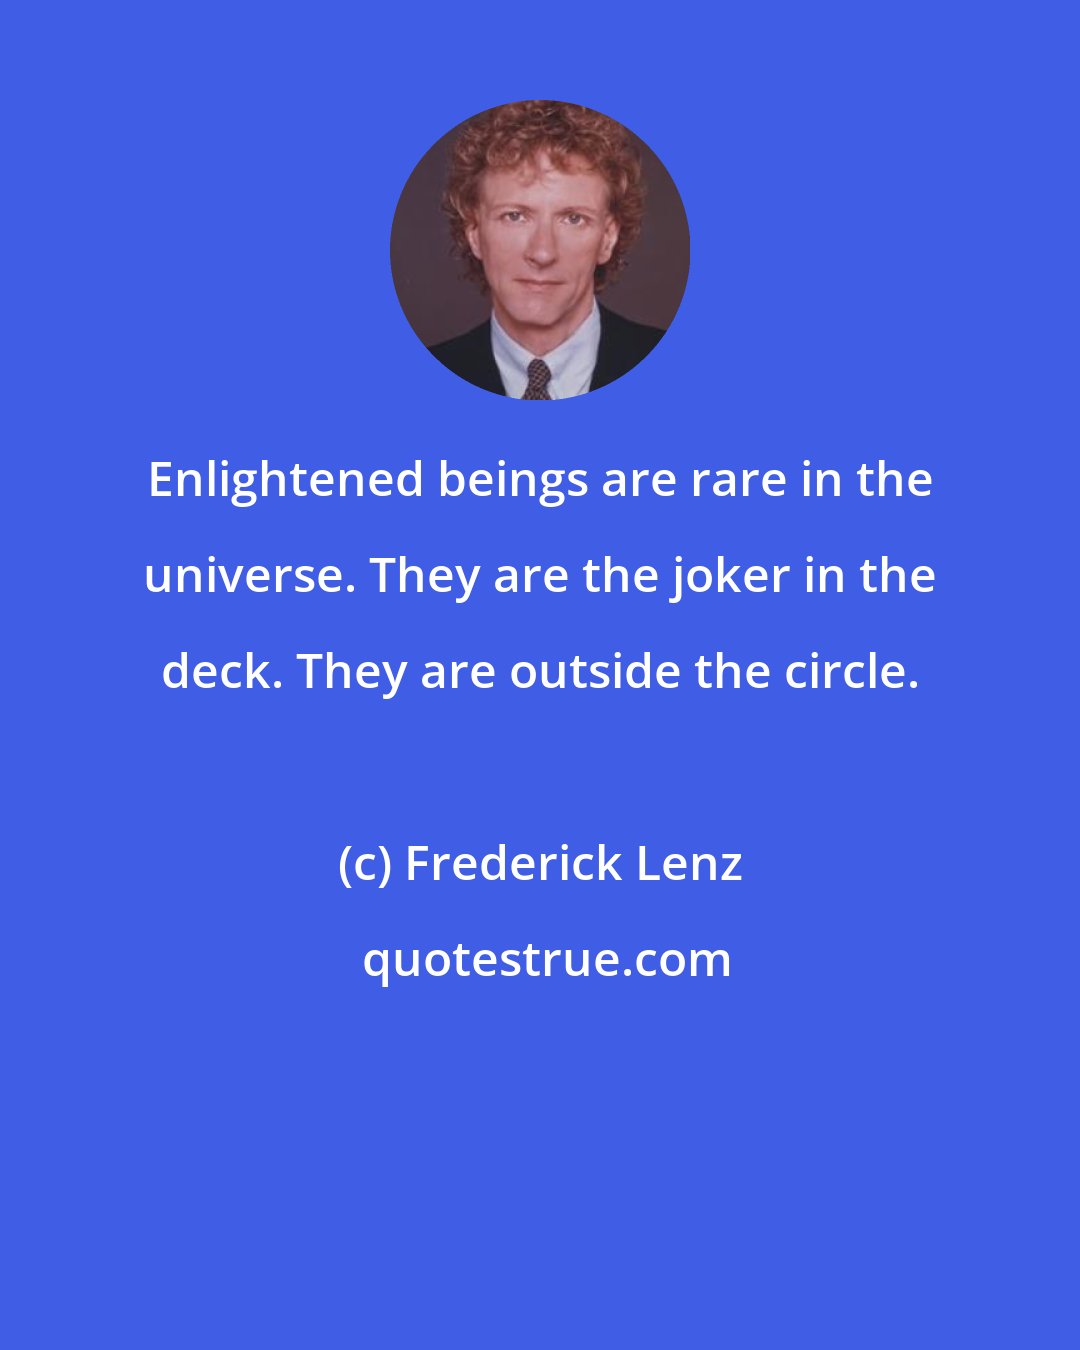 Frederick Lenz: Enlightened beings are rare in the universe. They are the joker in the deck. They are outside the circle.